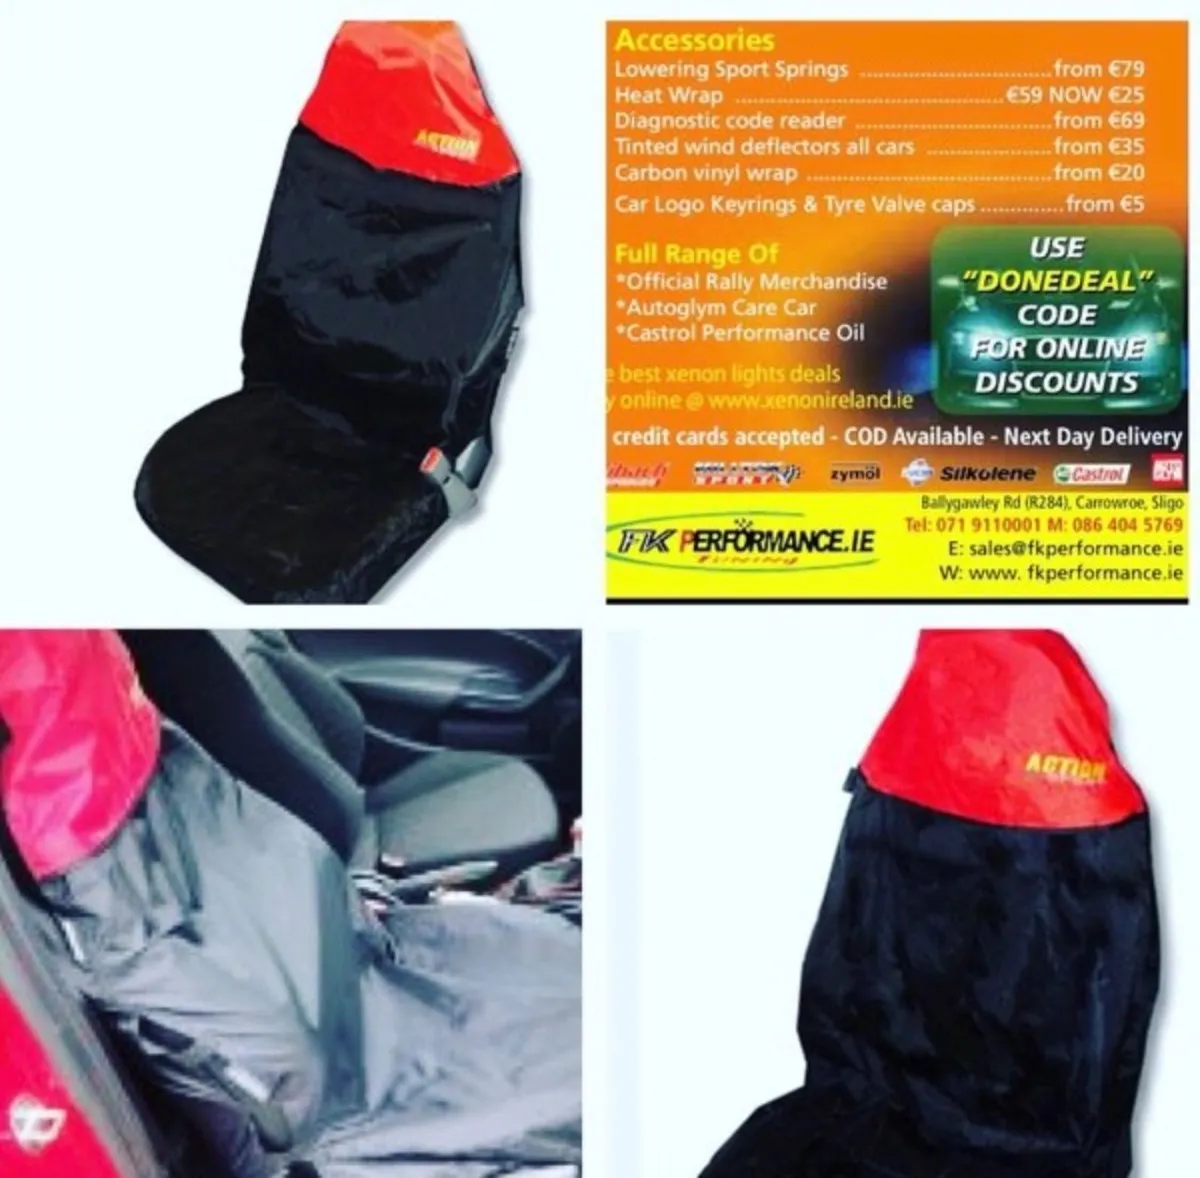 Action sport seat covers offer - Image 1